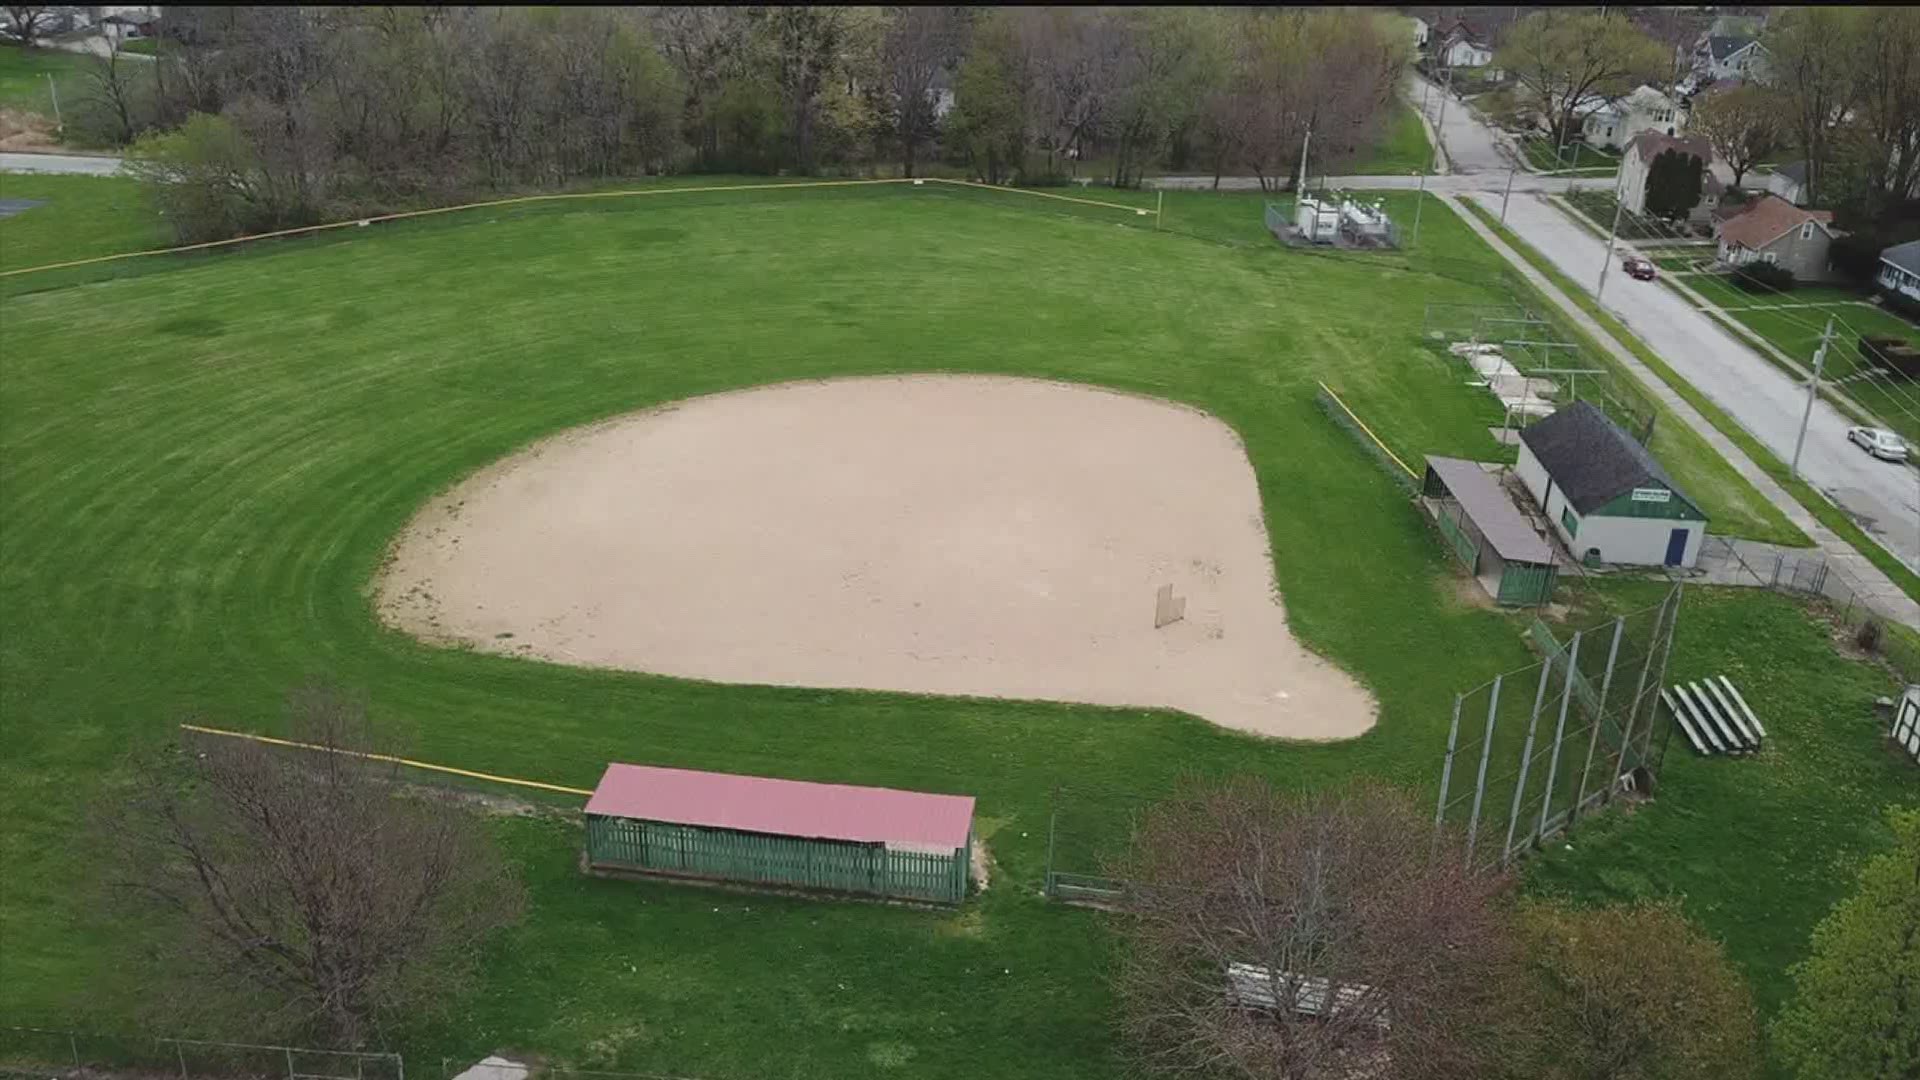 Organizers making sure kids who won't play ball don't go hungry